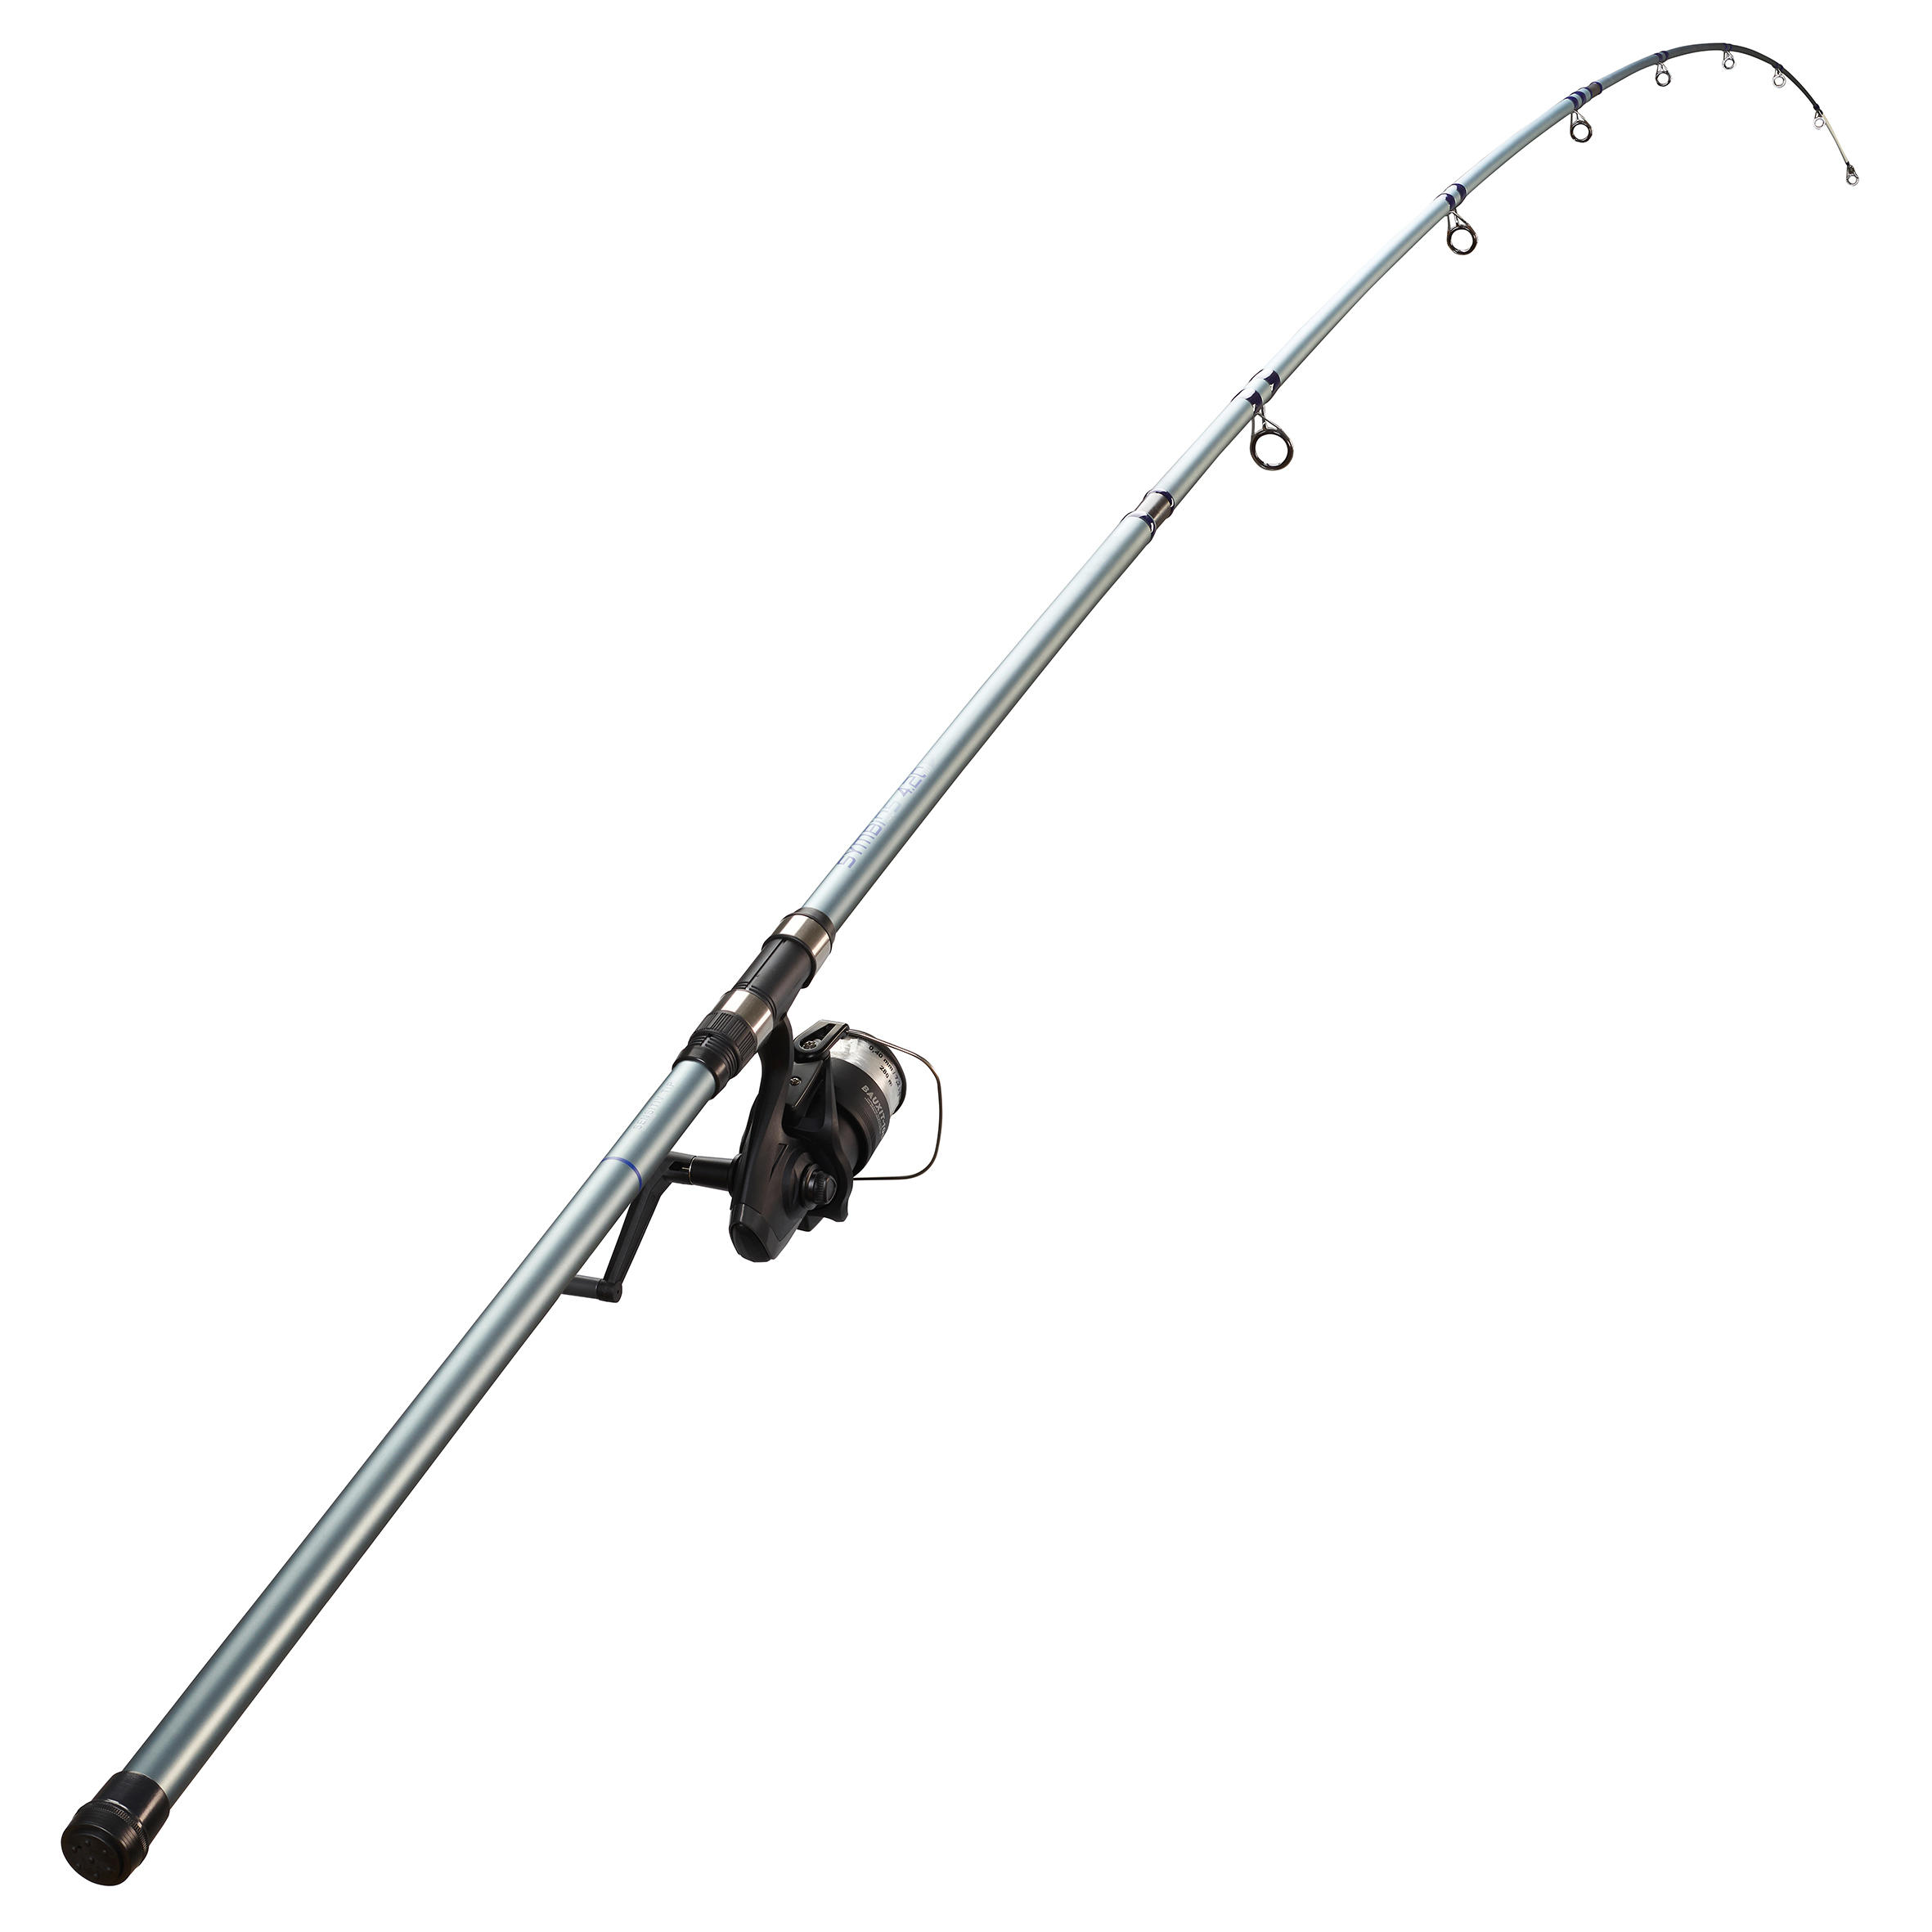 Fishing surfcasting rod and reel combo SYMBIOS-100 420 100-200g 2/9